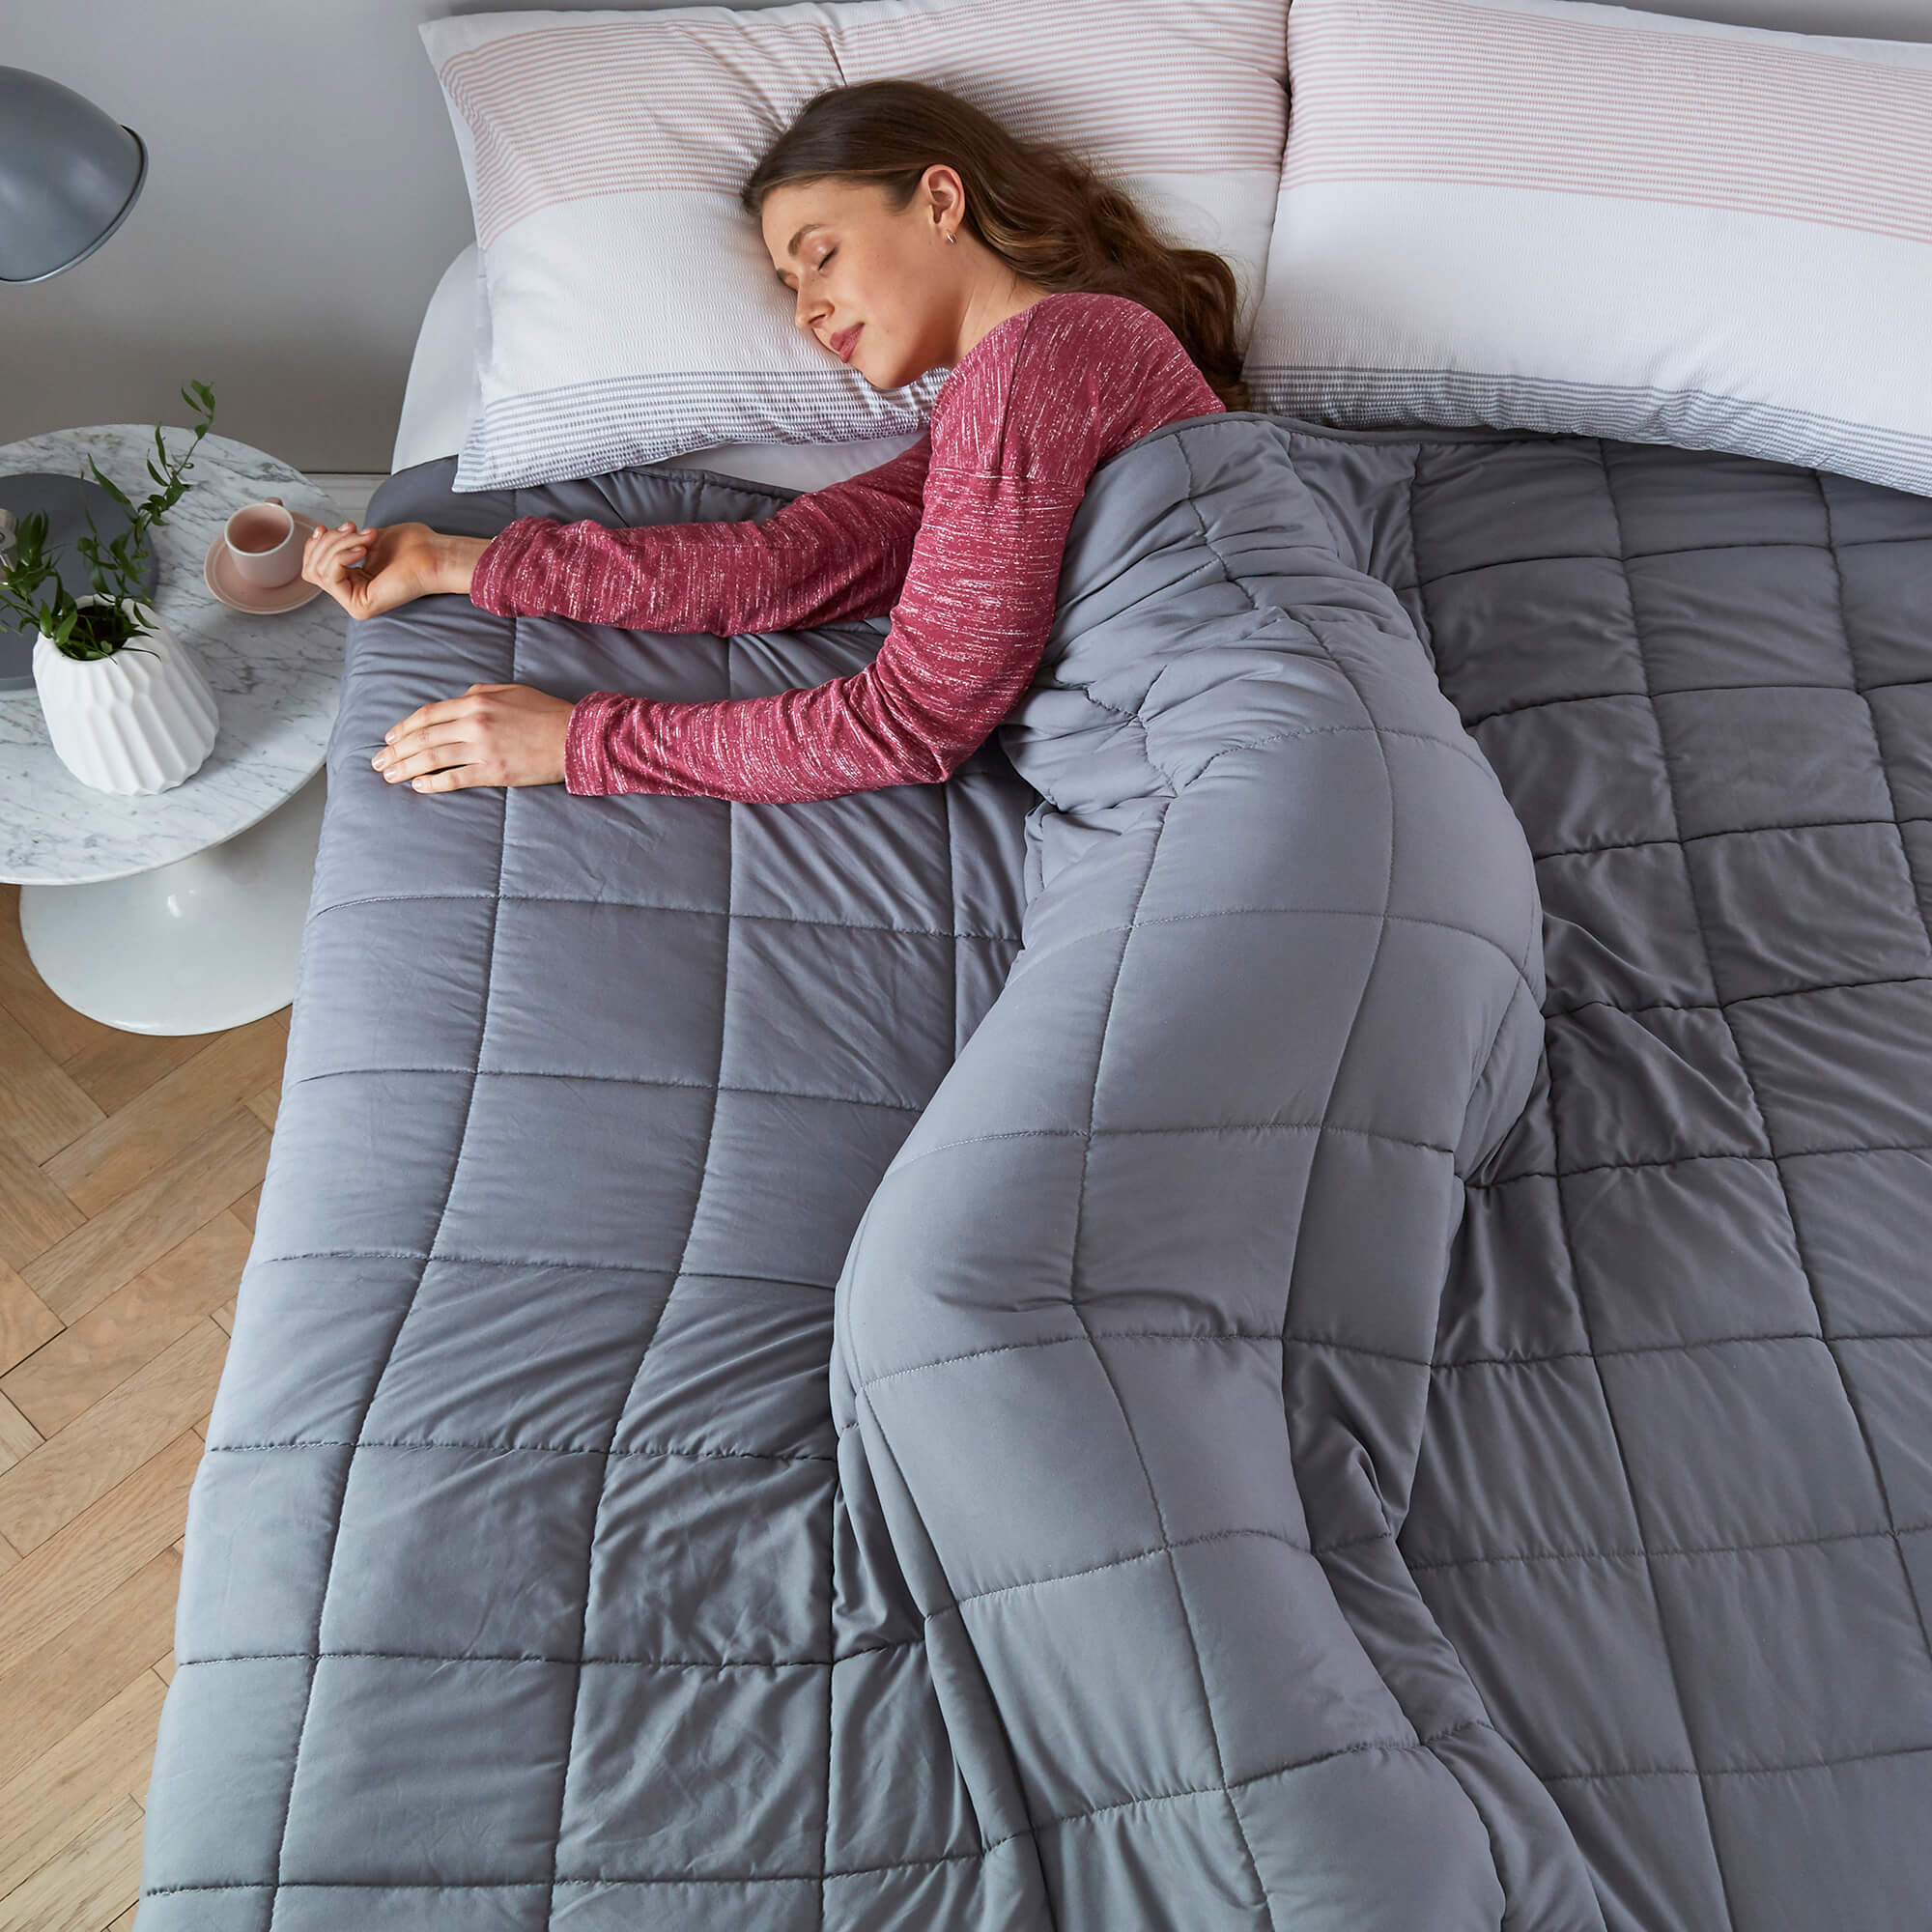 Do Weighted Blankets Help You Sleep On Your Back Hotsell